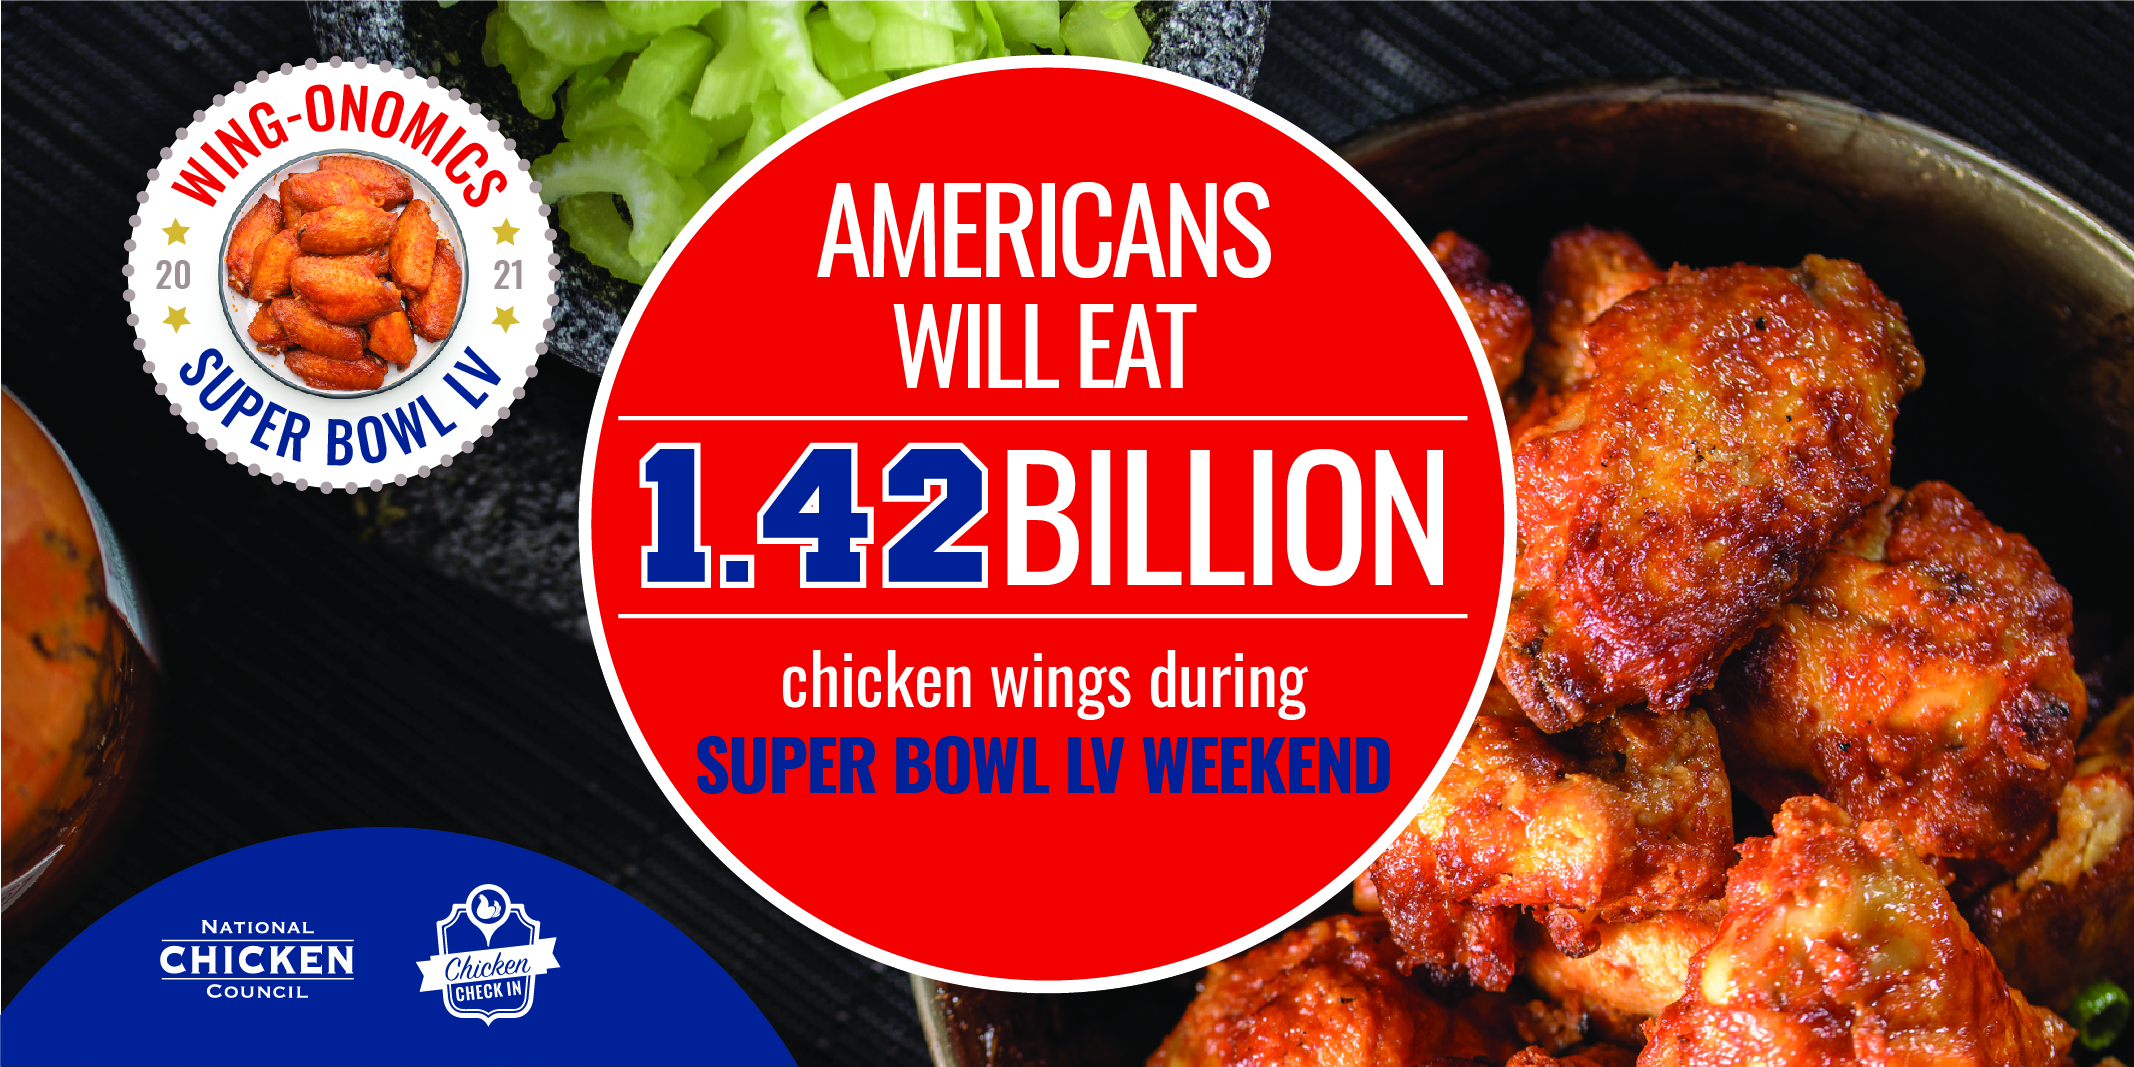 National Chicken Council | Americans to Record 1.42 Billion Chicken Wings for Super Bowl